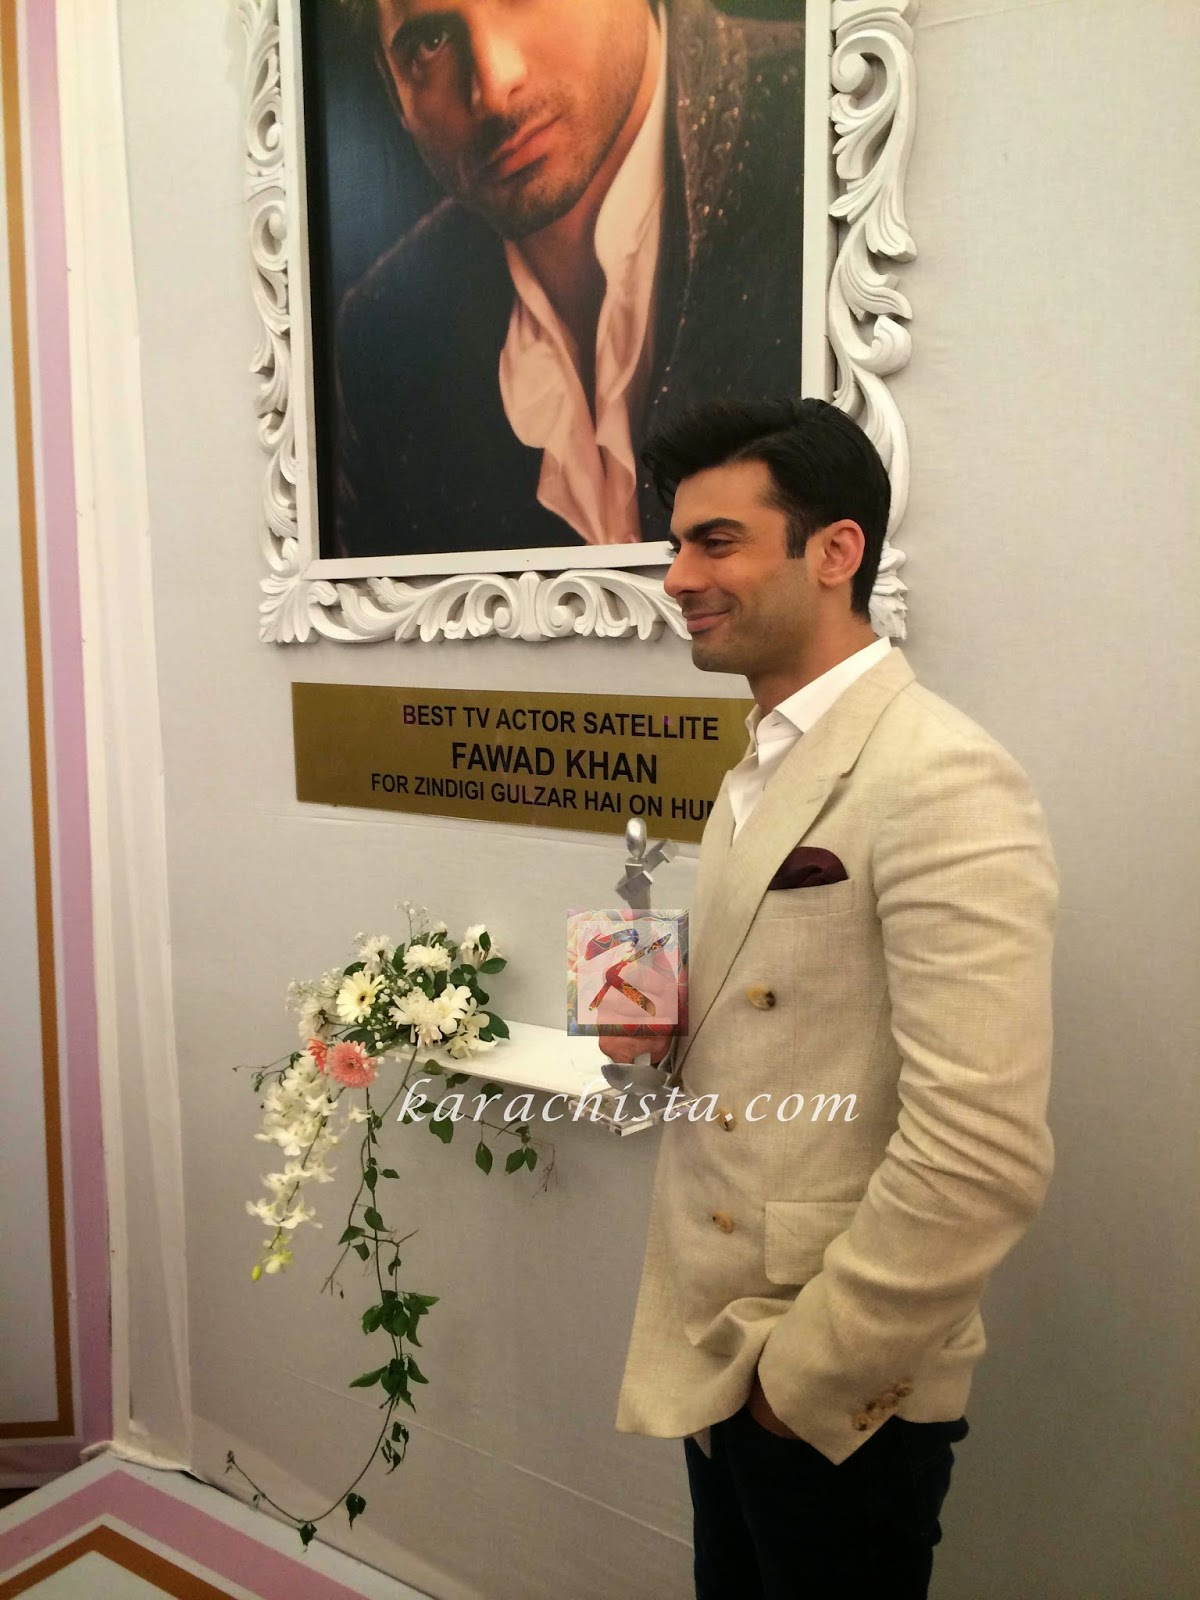 Fawad Khan wins Lux Style Award for Best TV Actor (satellite)